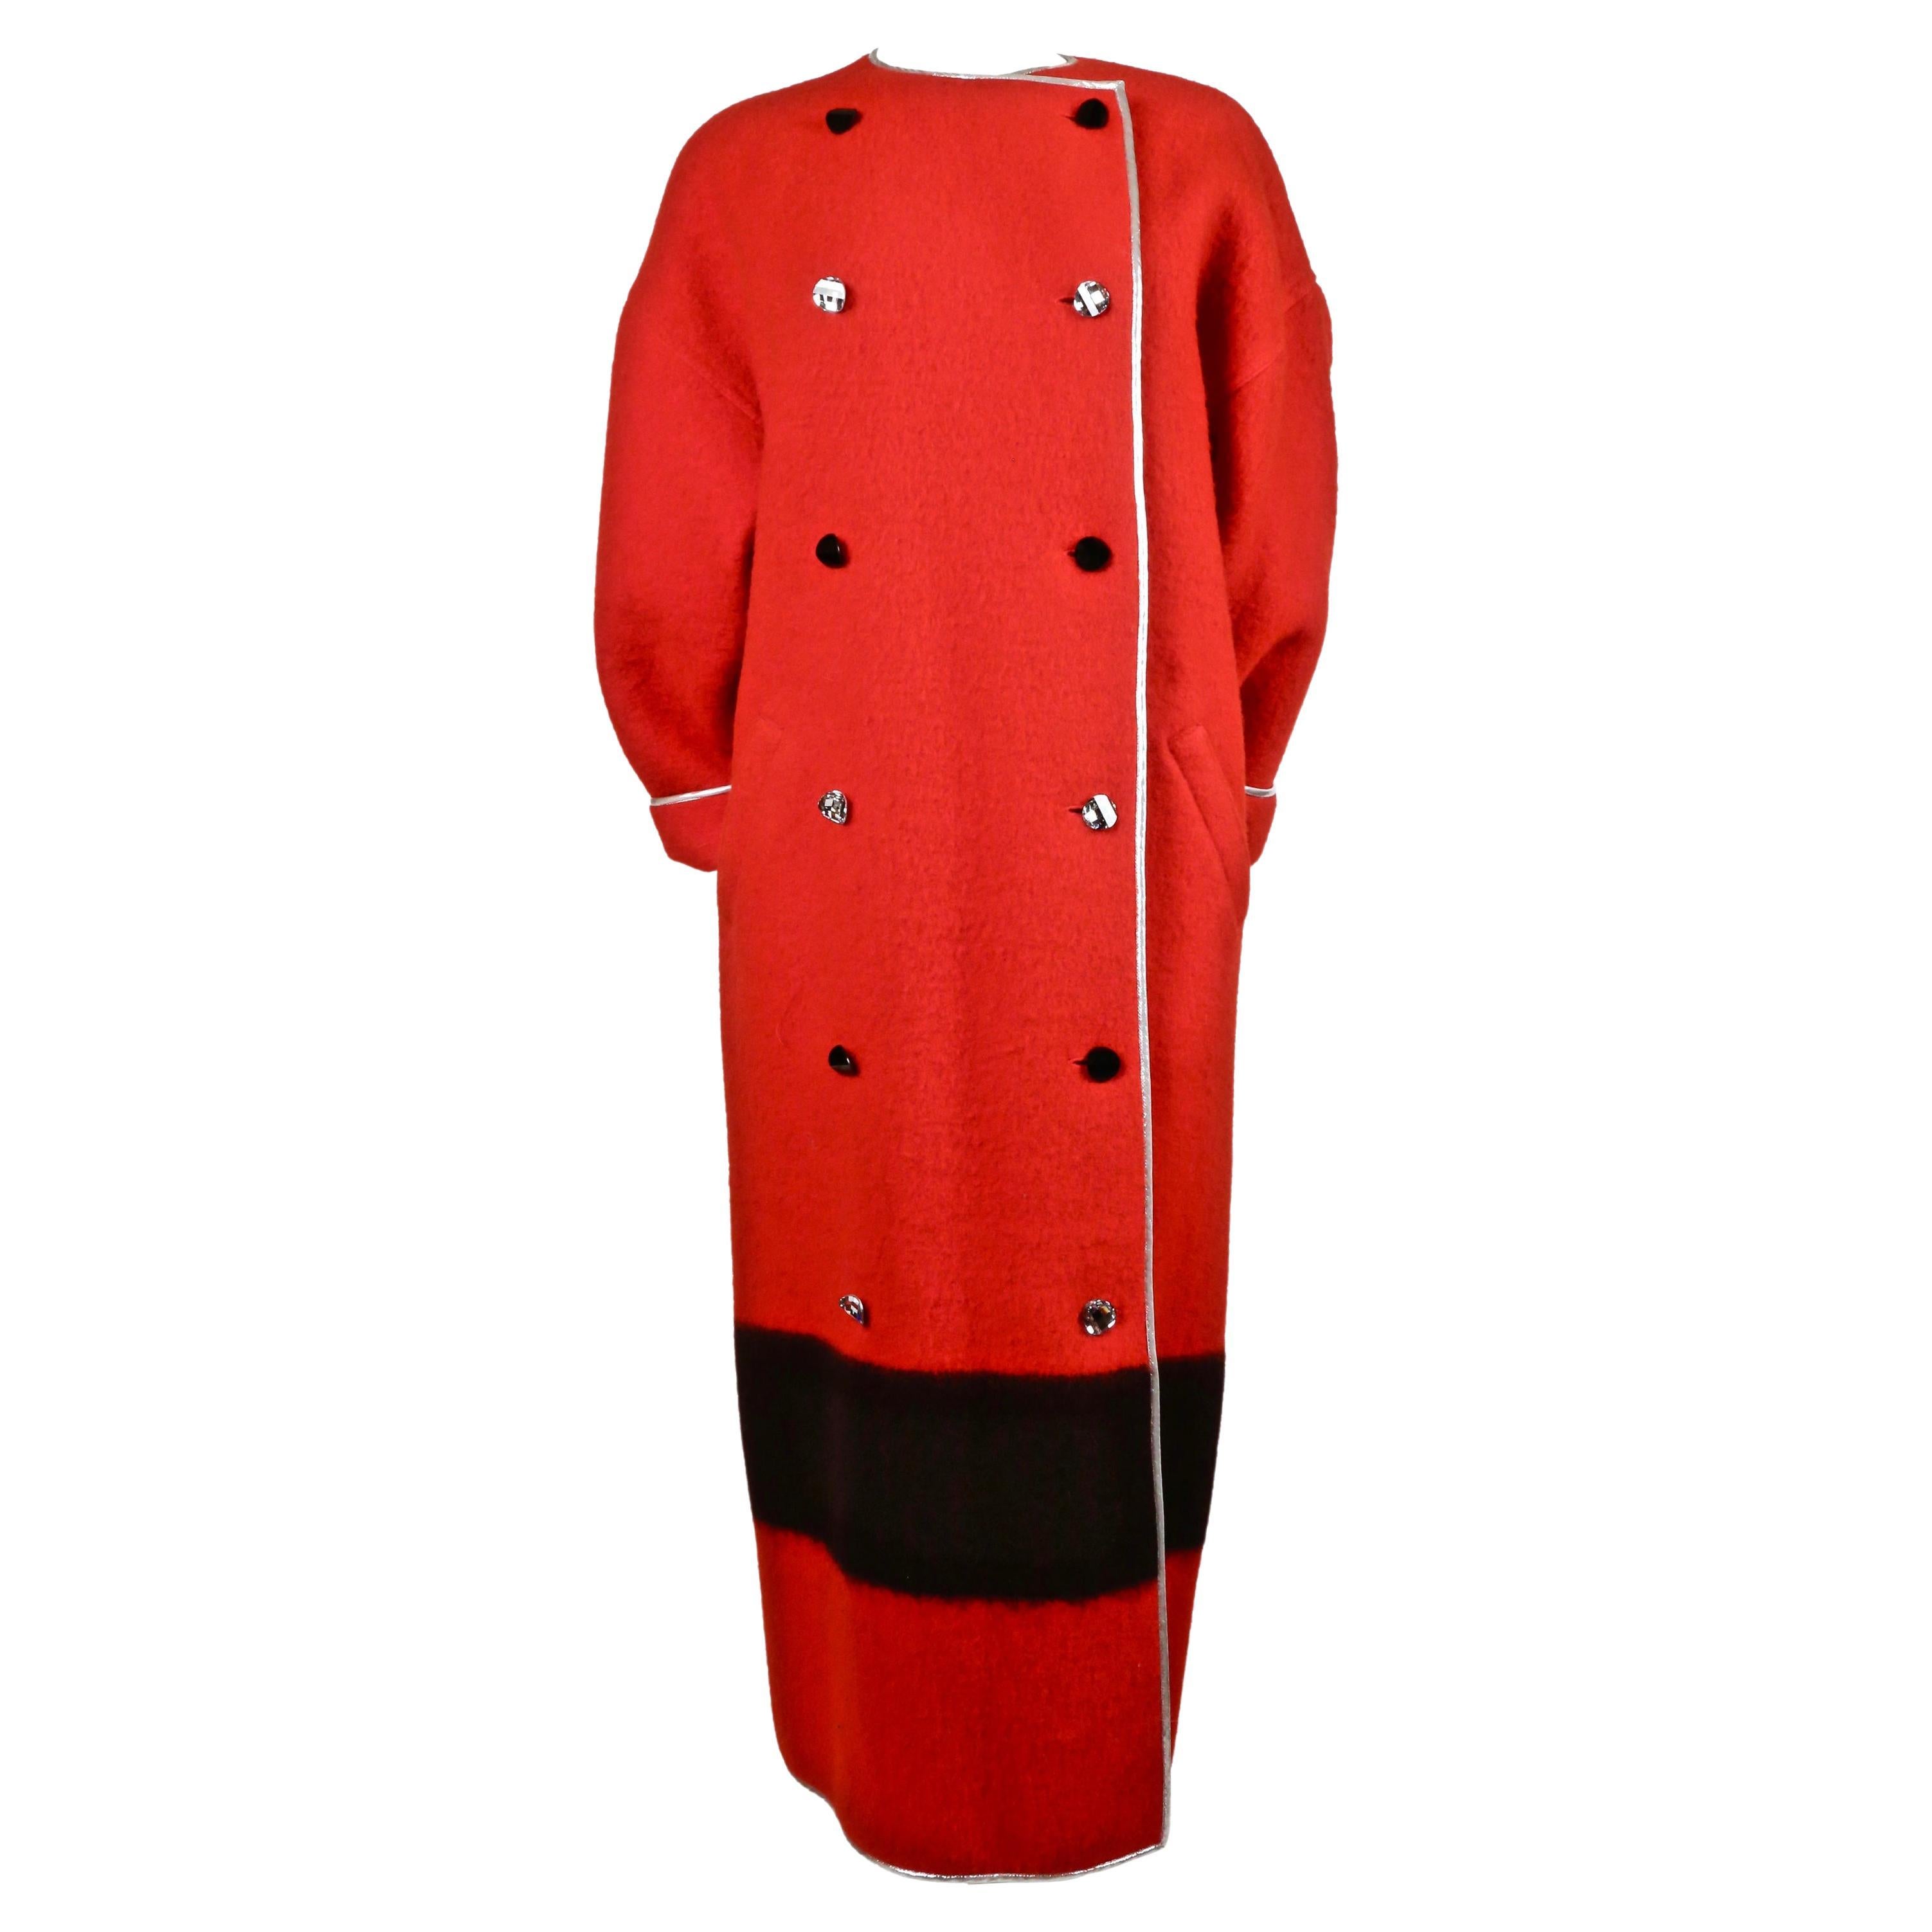 GEOFFREY BEENE red wool blanket coat with faceted buttons For Sale